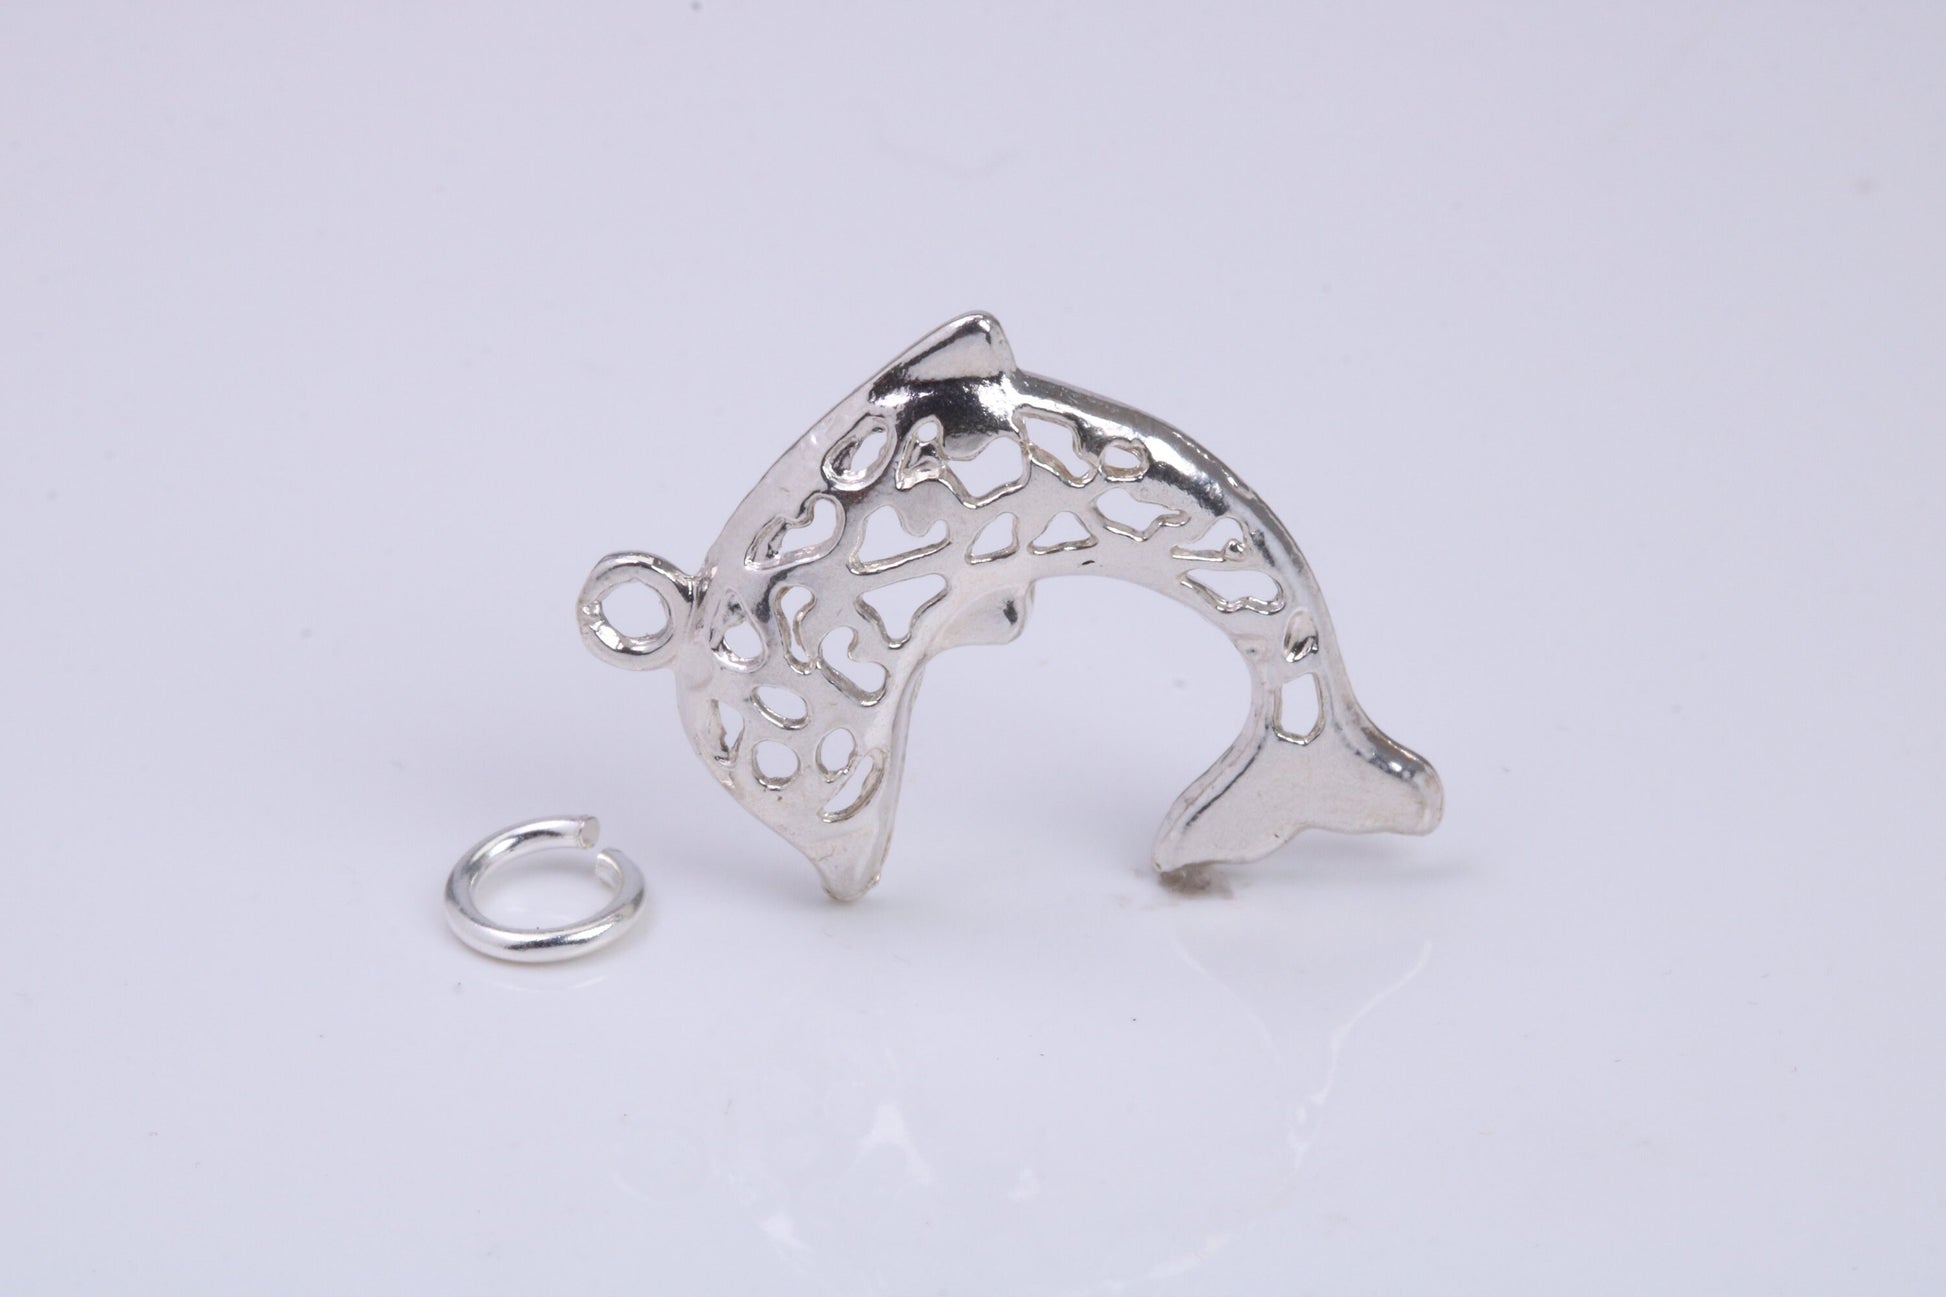 Fish Charm, Traditional Charm, Made from Solid 925 Grade Sterling Silver, Complete with Attachment Link